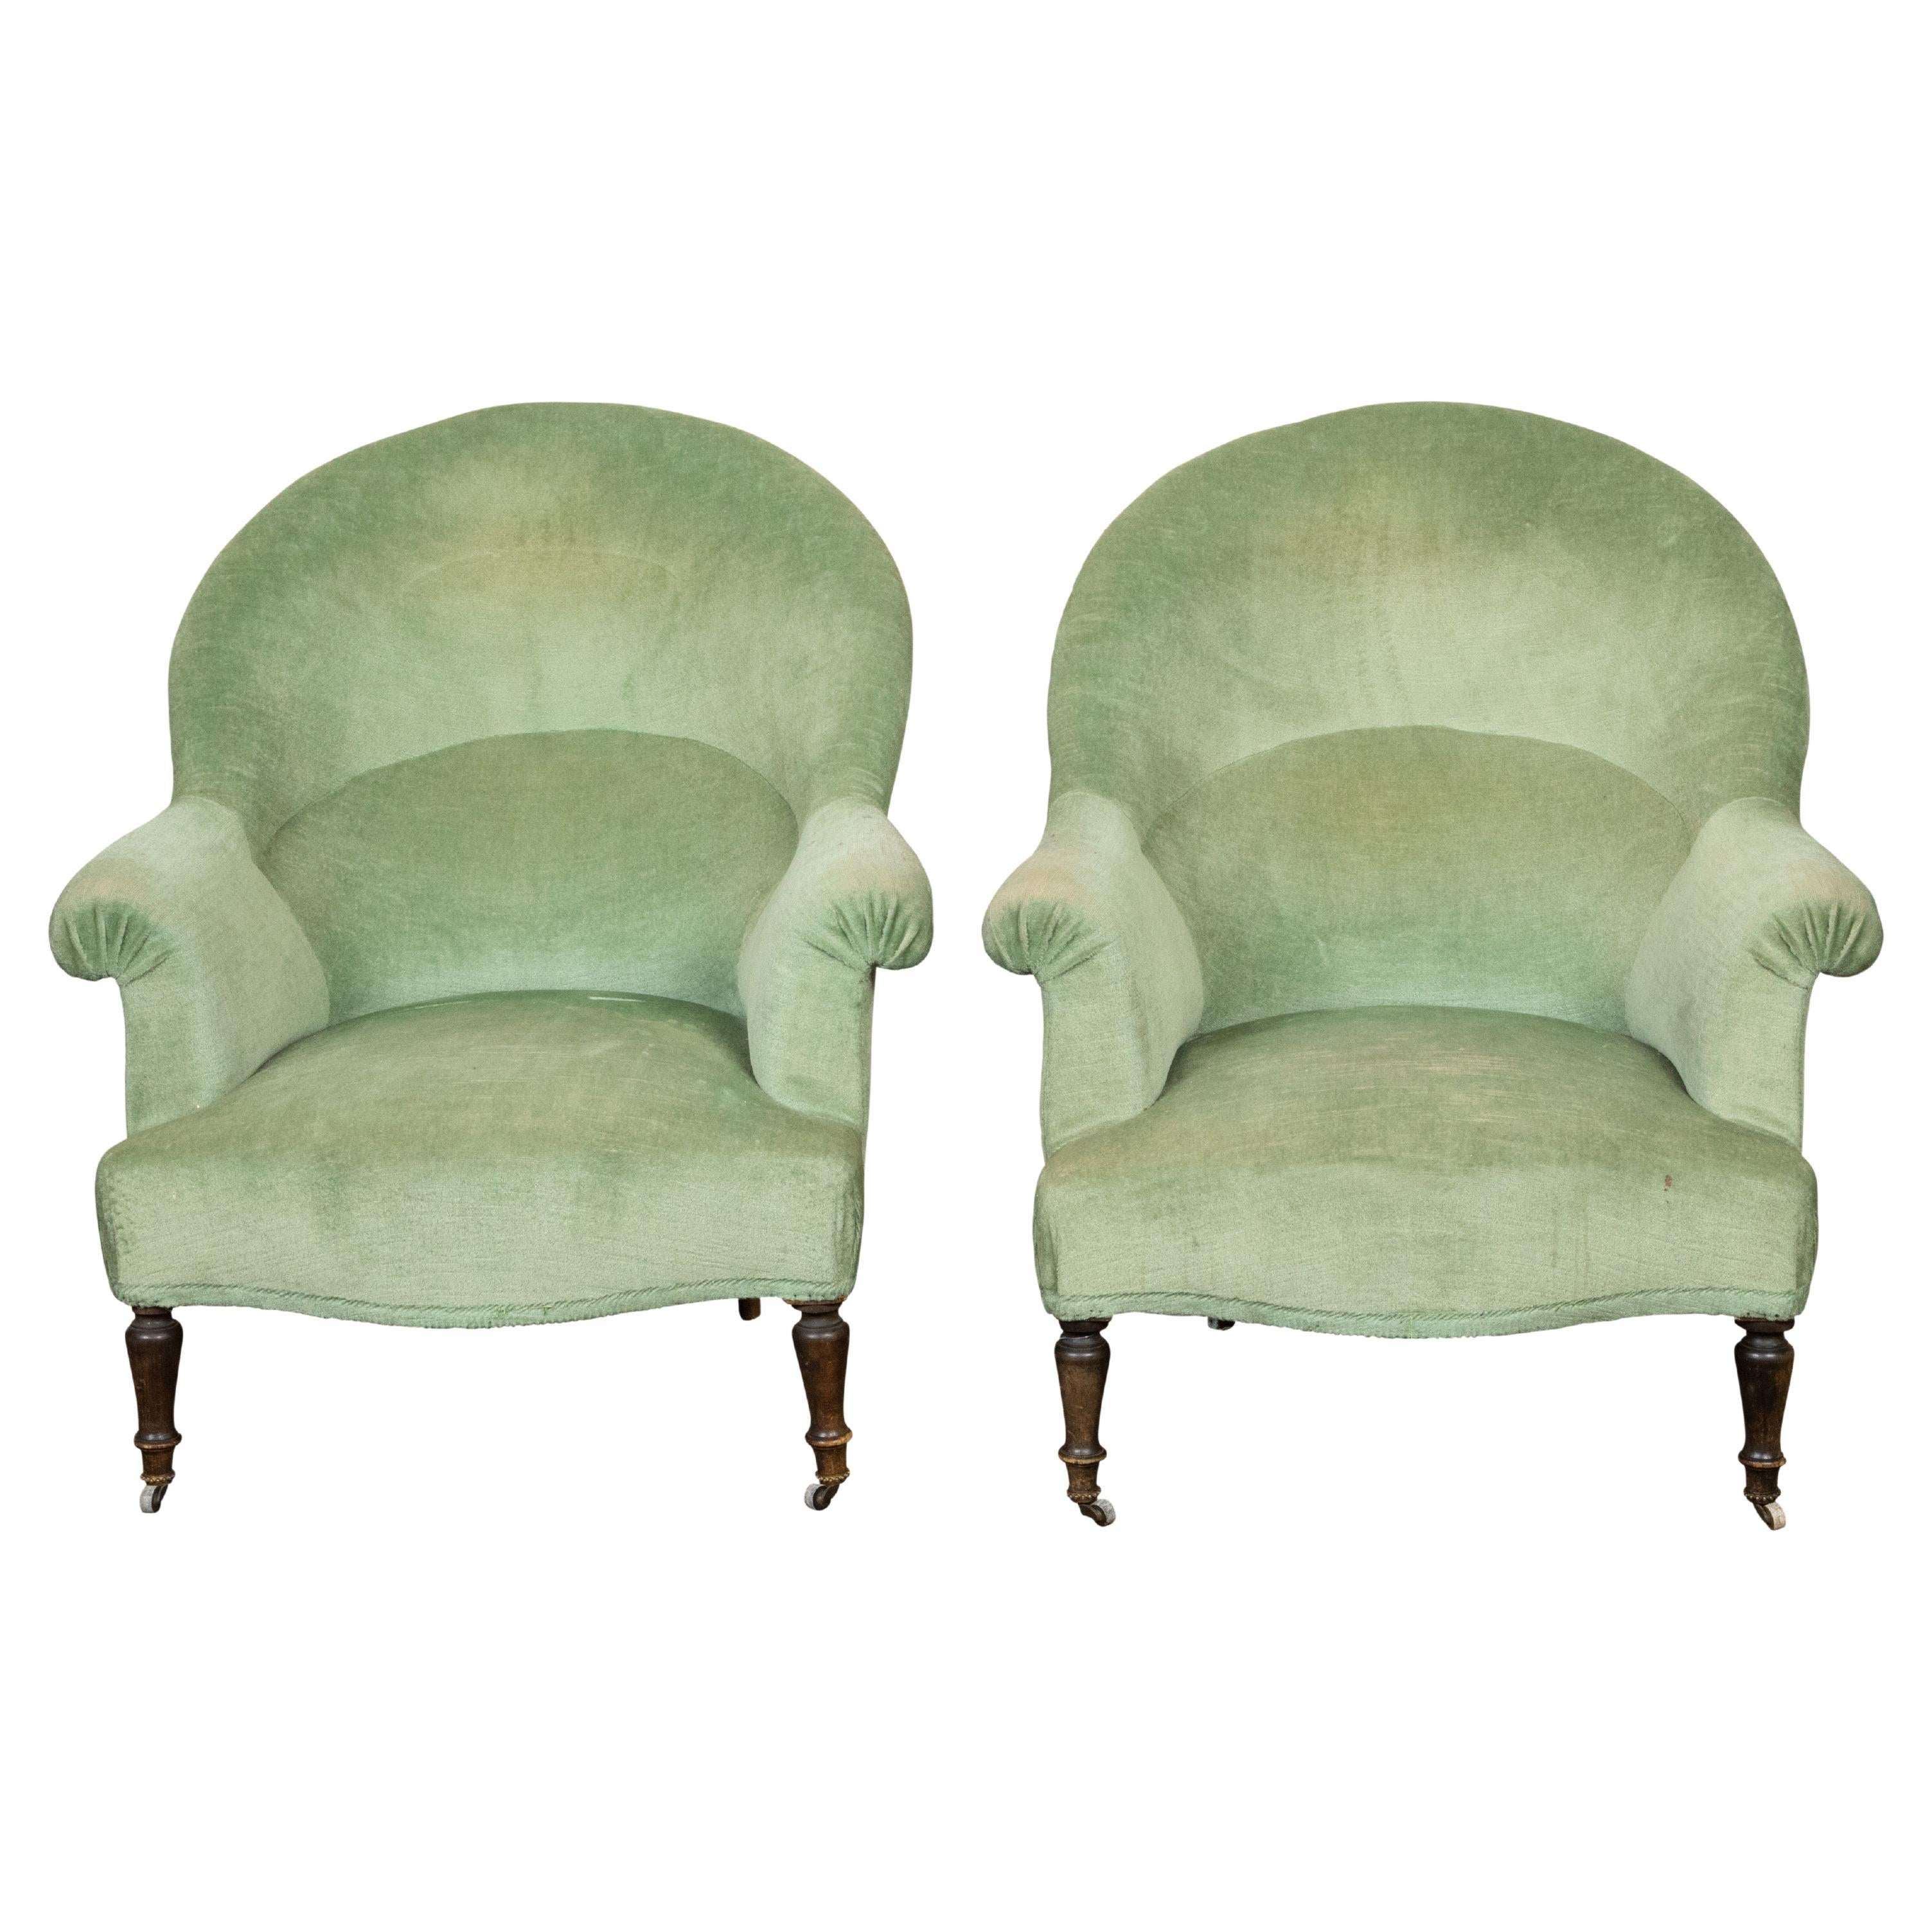 Pair of French Turn of the Century Bergère Chairs with Green Velvet Upholstery For Sale